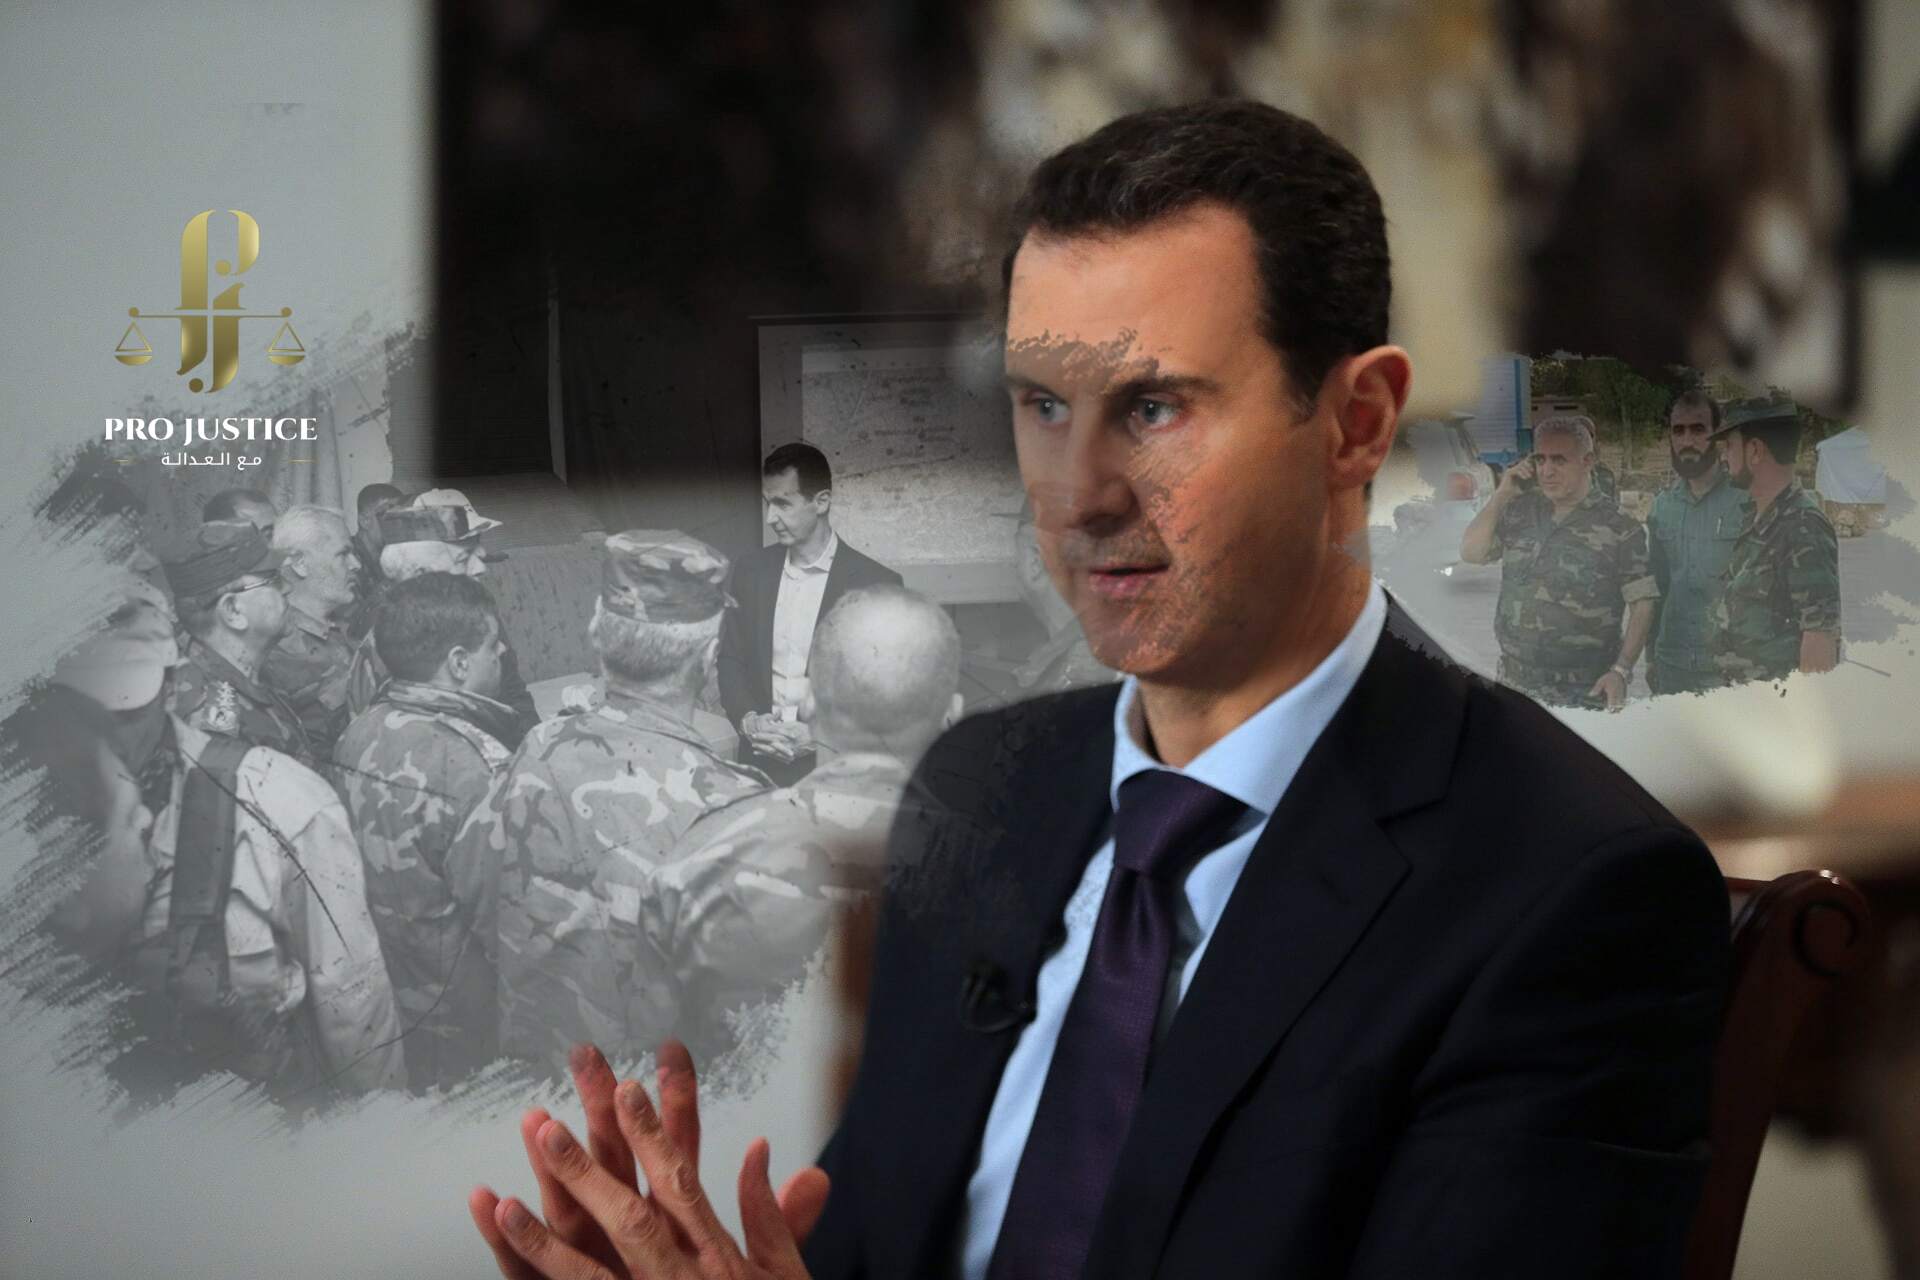 Assad must face trial for his atrocities against the Syrian people